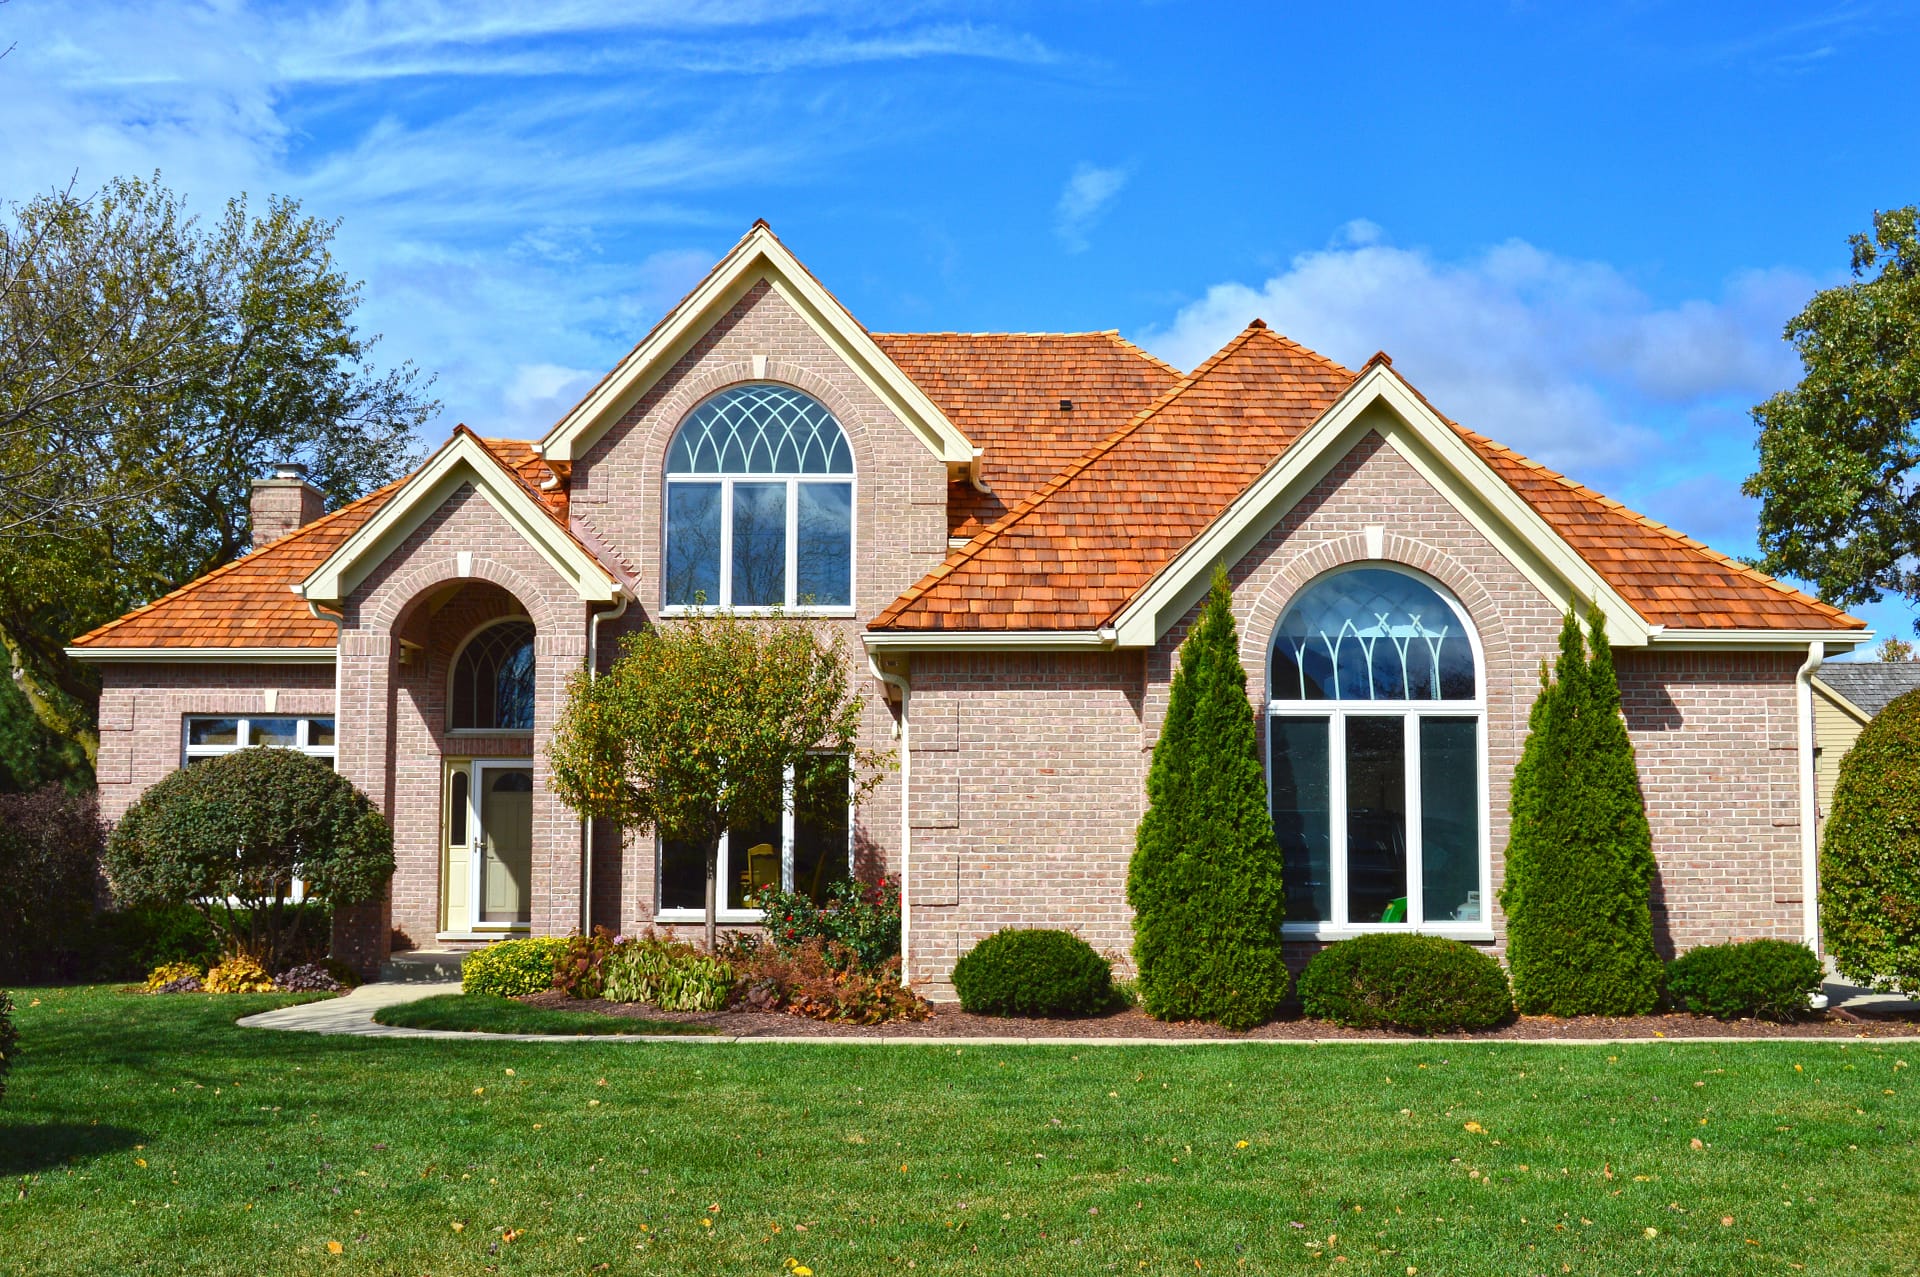 Roof Replacements Made Easy in Hinsdale, IL